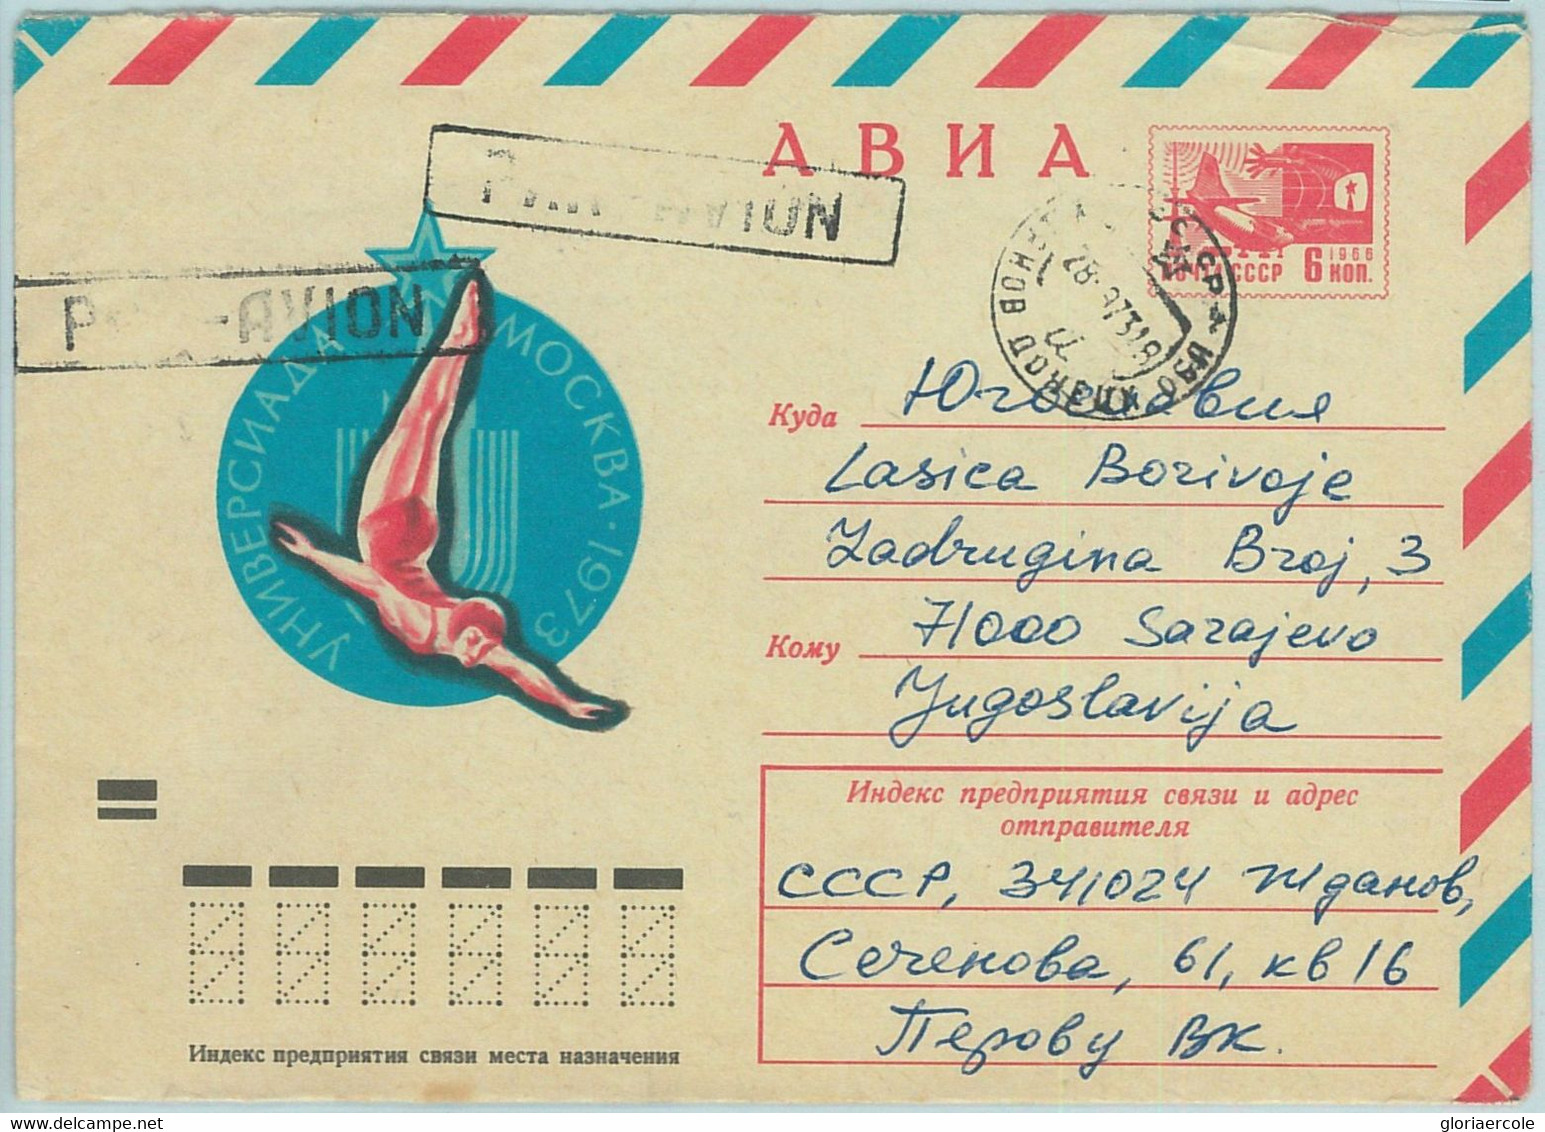 67800 - RUSSIA - POSTAL HISTORY - STATIONERY COVER - 1973, Universiade Games, Diving - Plongée